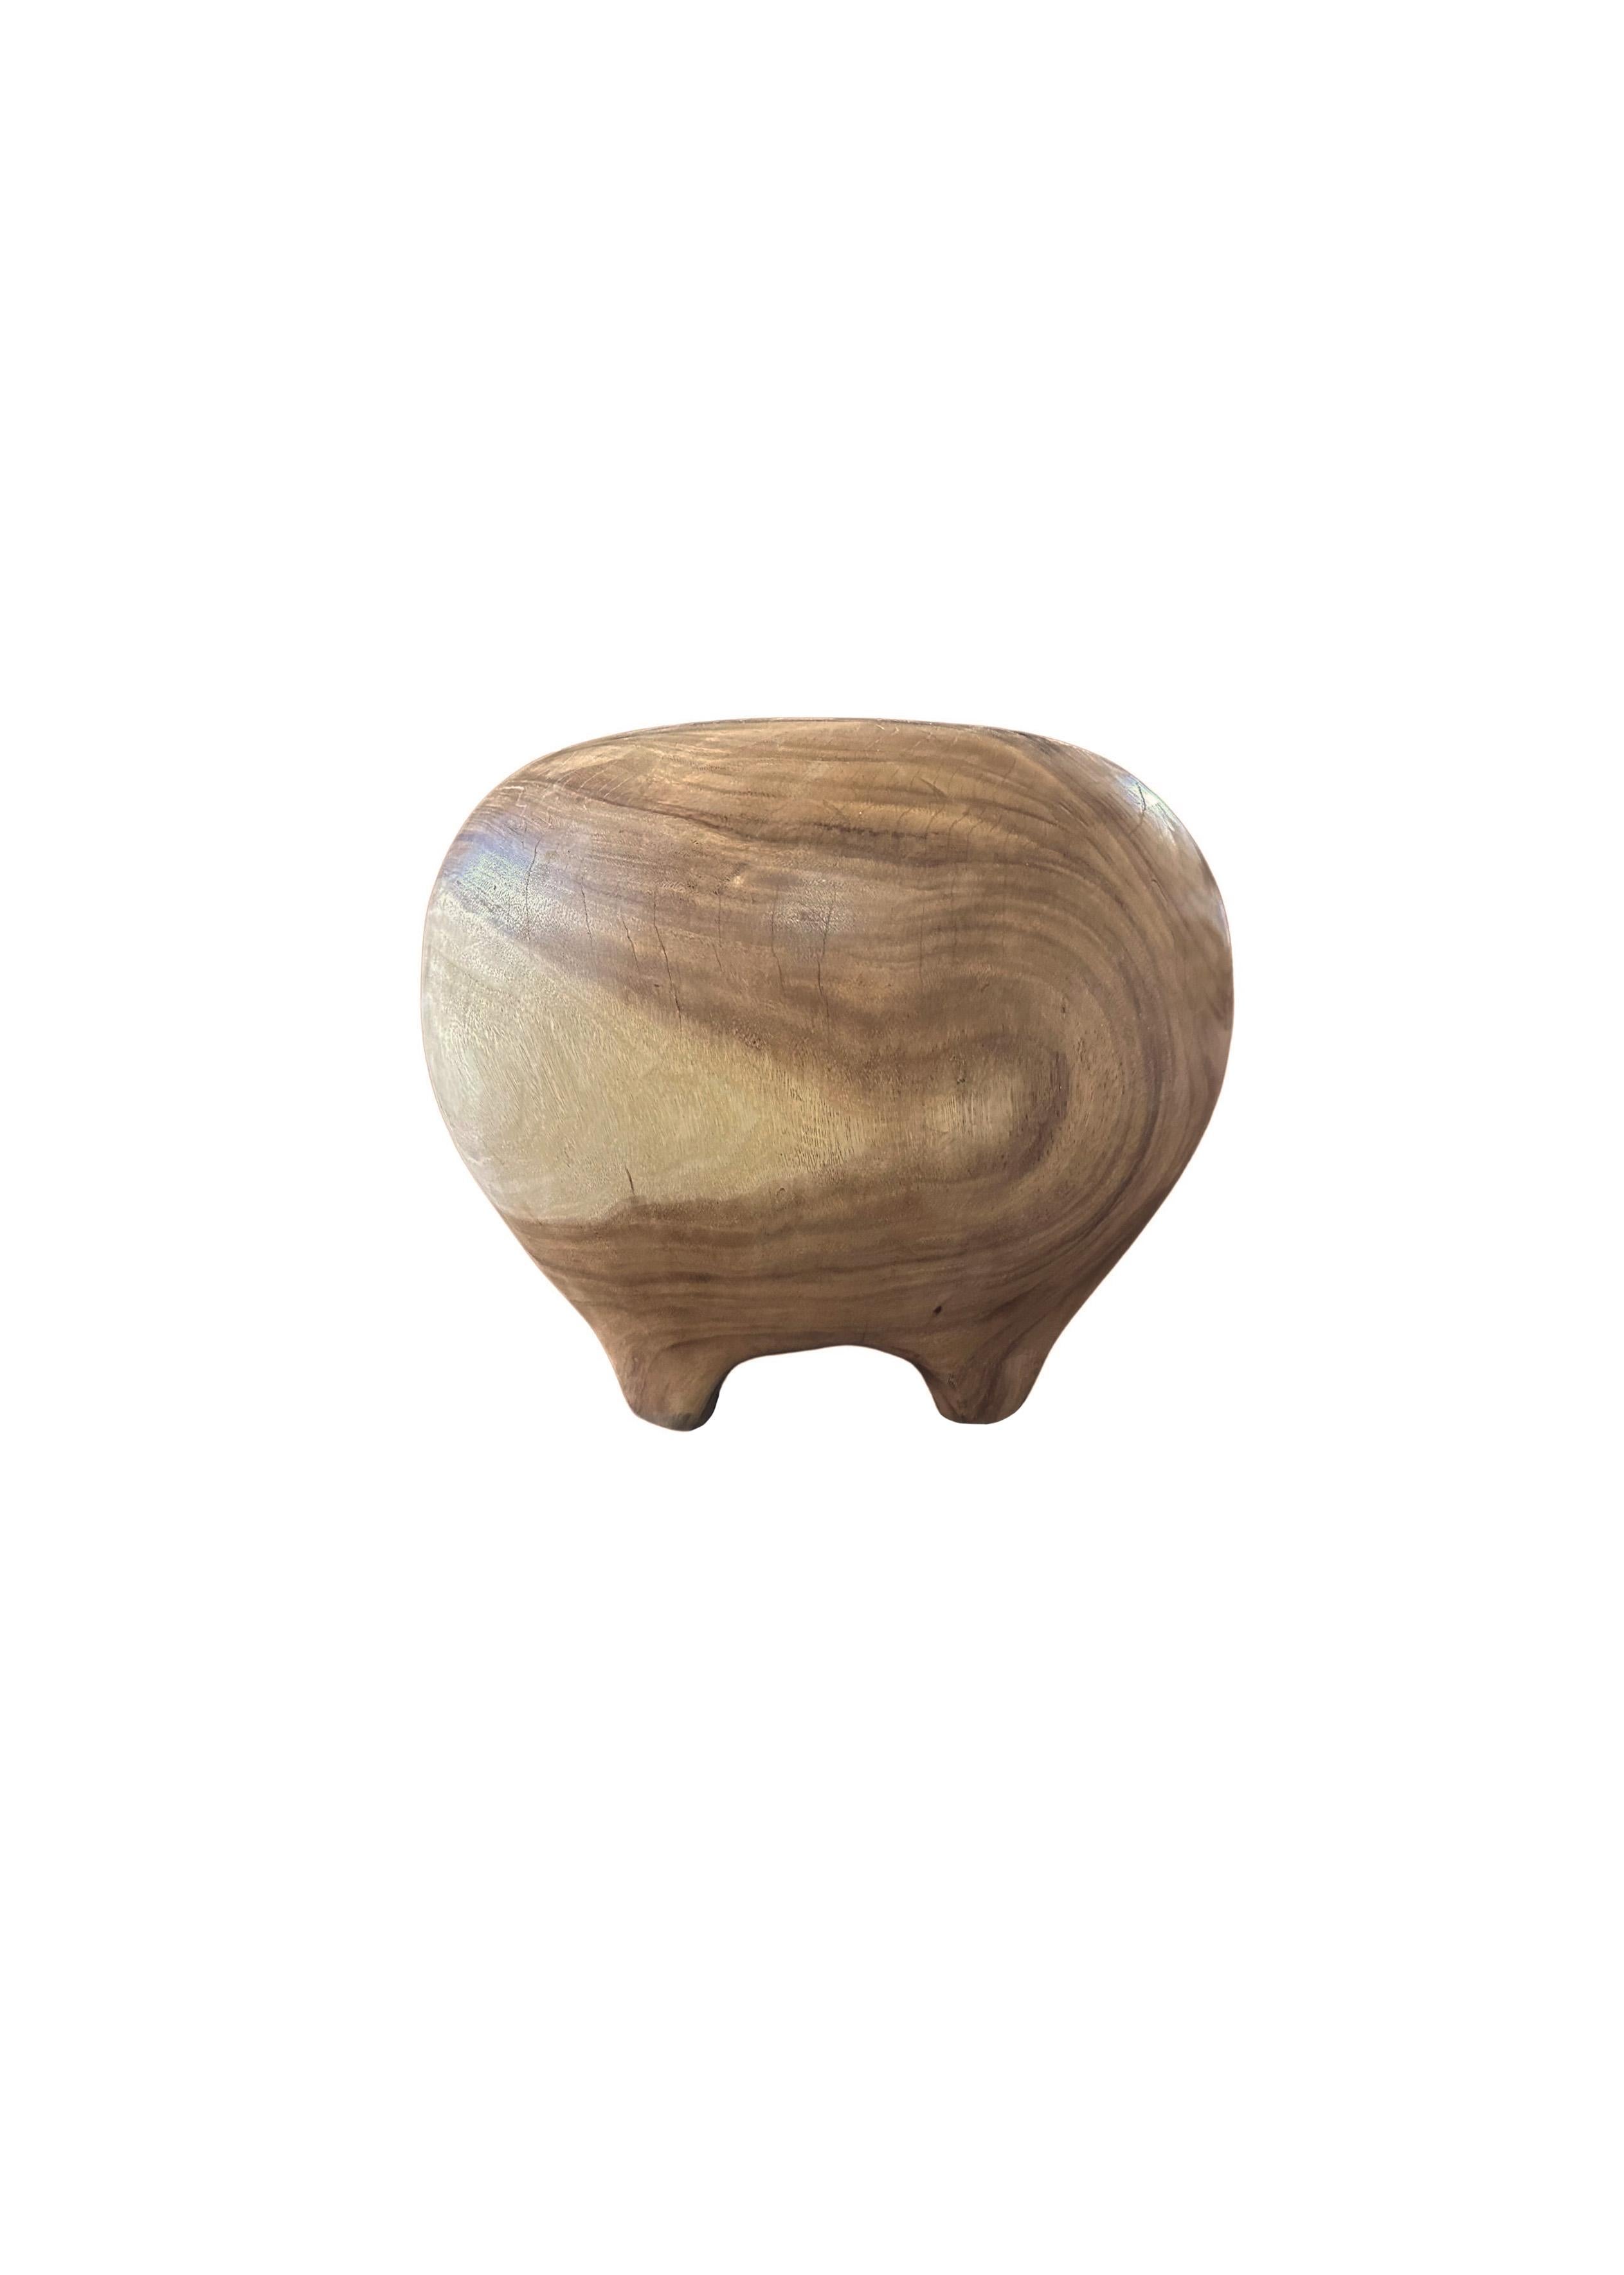 A wonderfully organic round side table that sits on 6, low, arched legs that blend with its form. Its neutral pigment and subtle wood texture makes it perfect for any space. This table was crafted from a solid trunk of mango wood. The table was